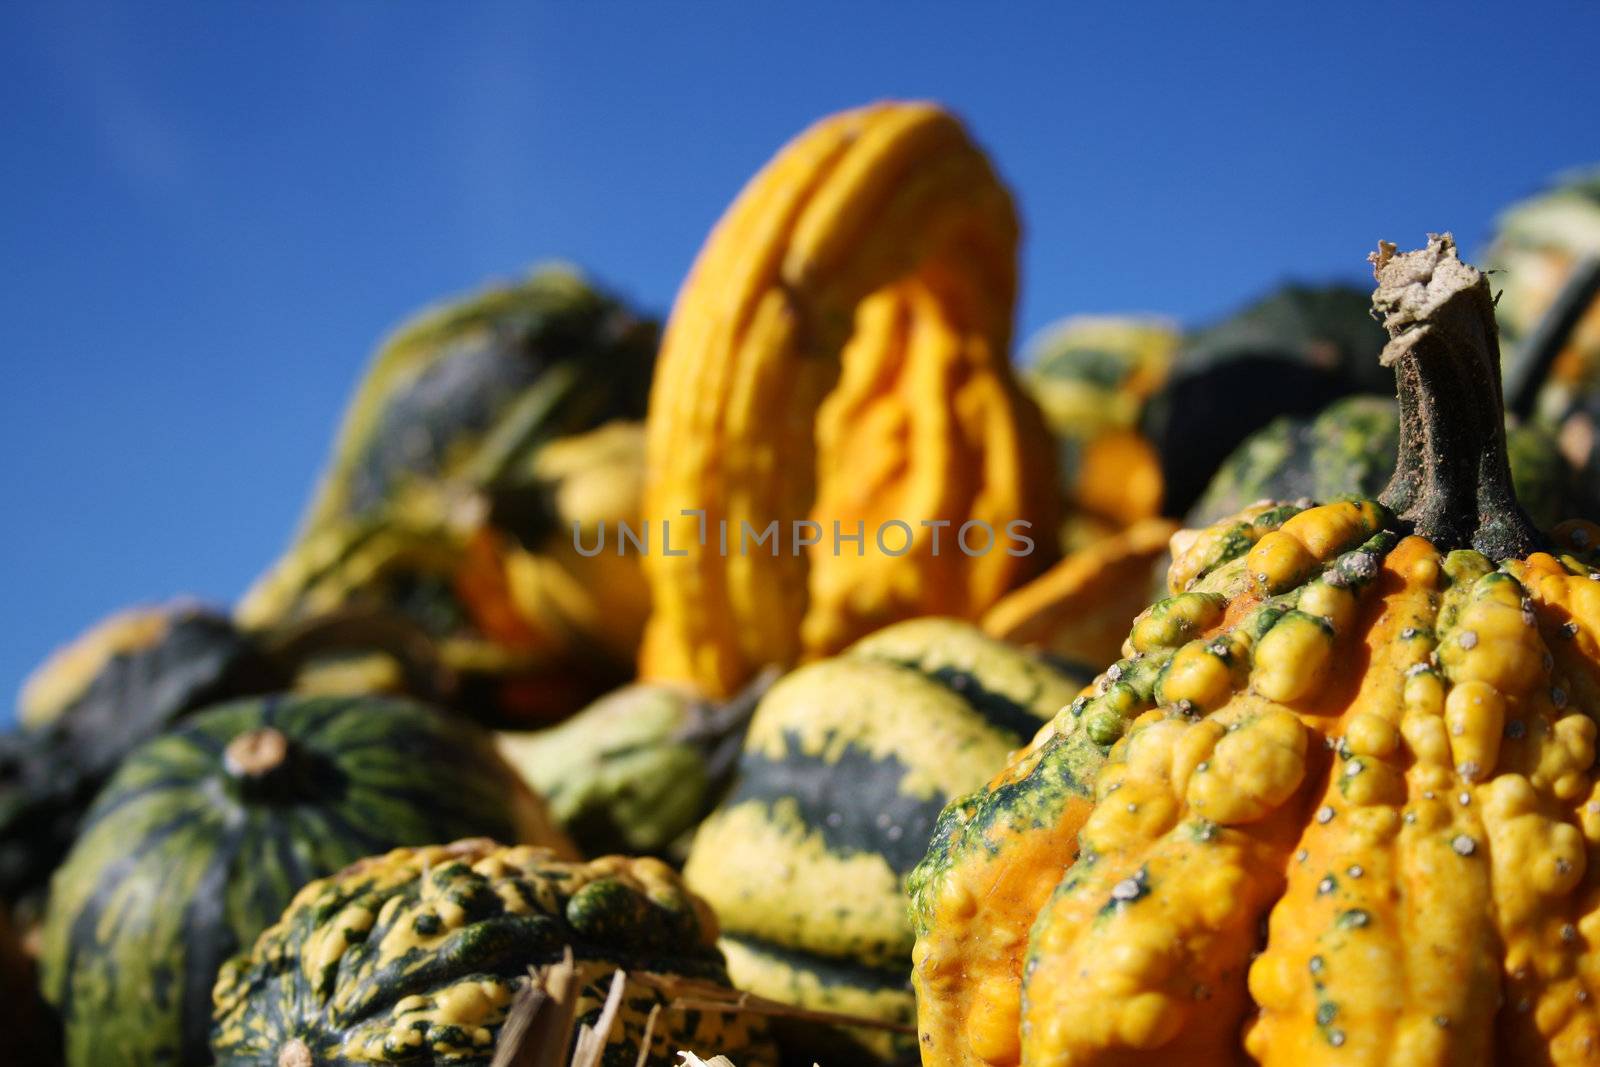 Pretty different types of pumpkins for sale